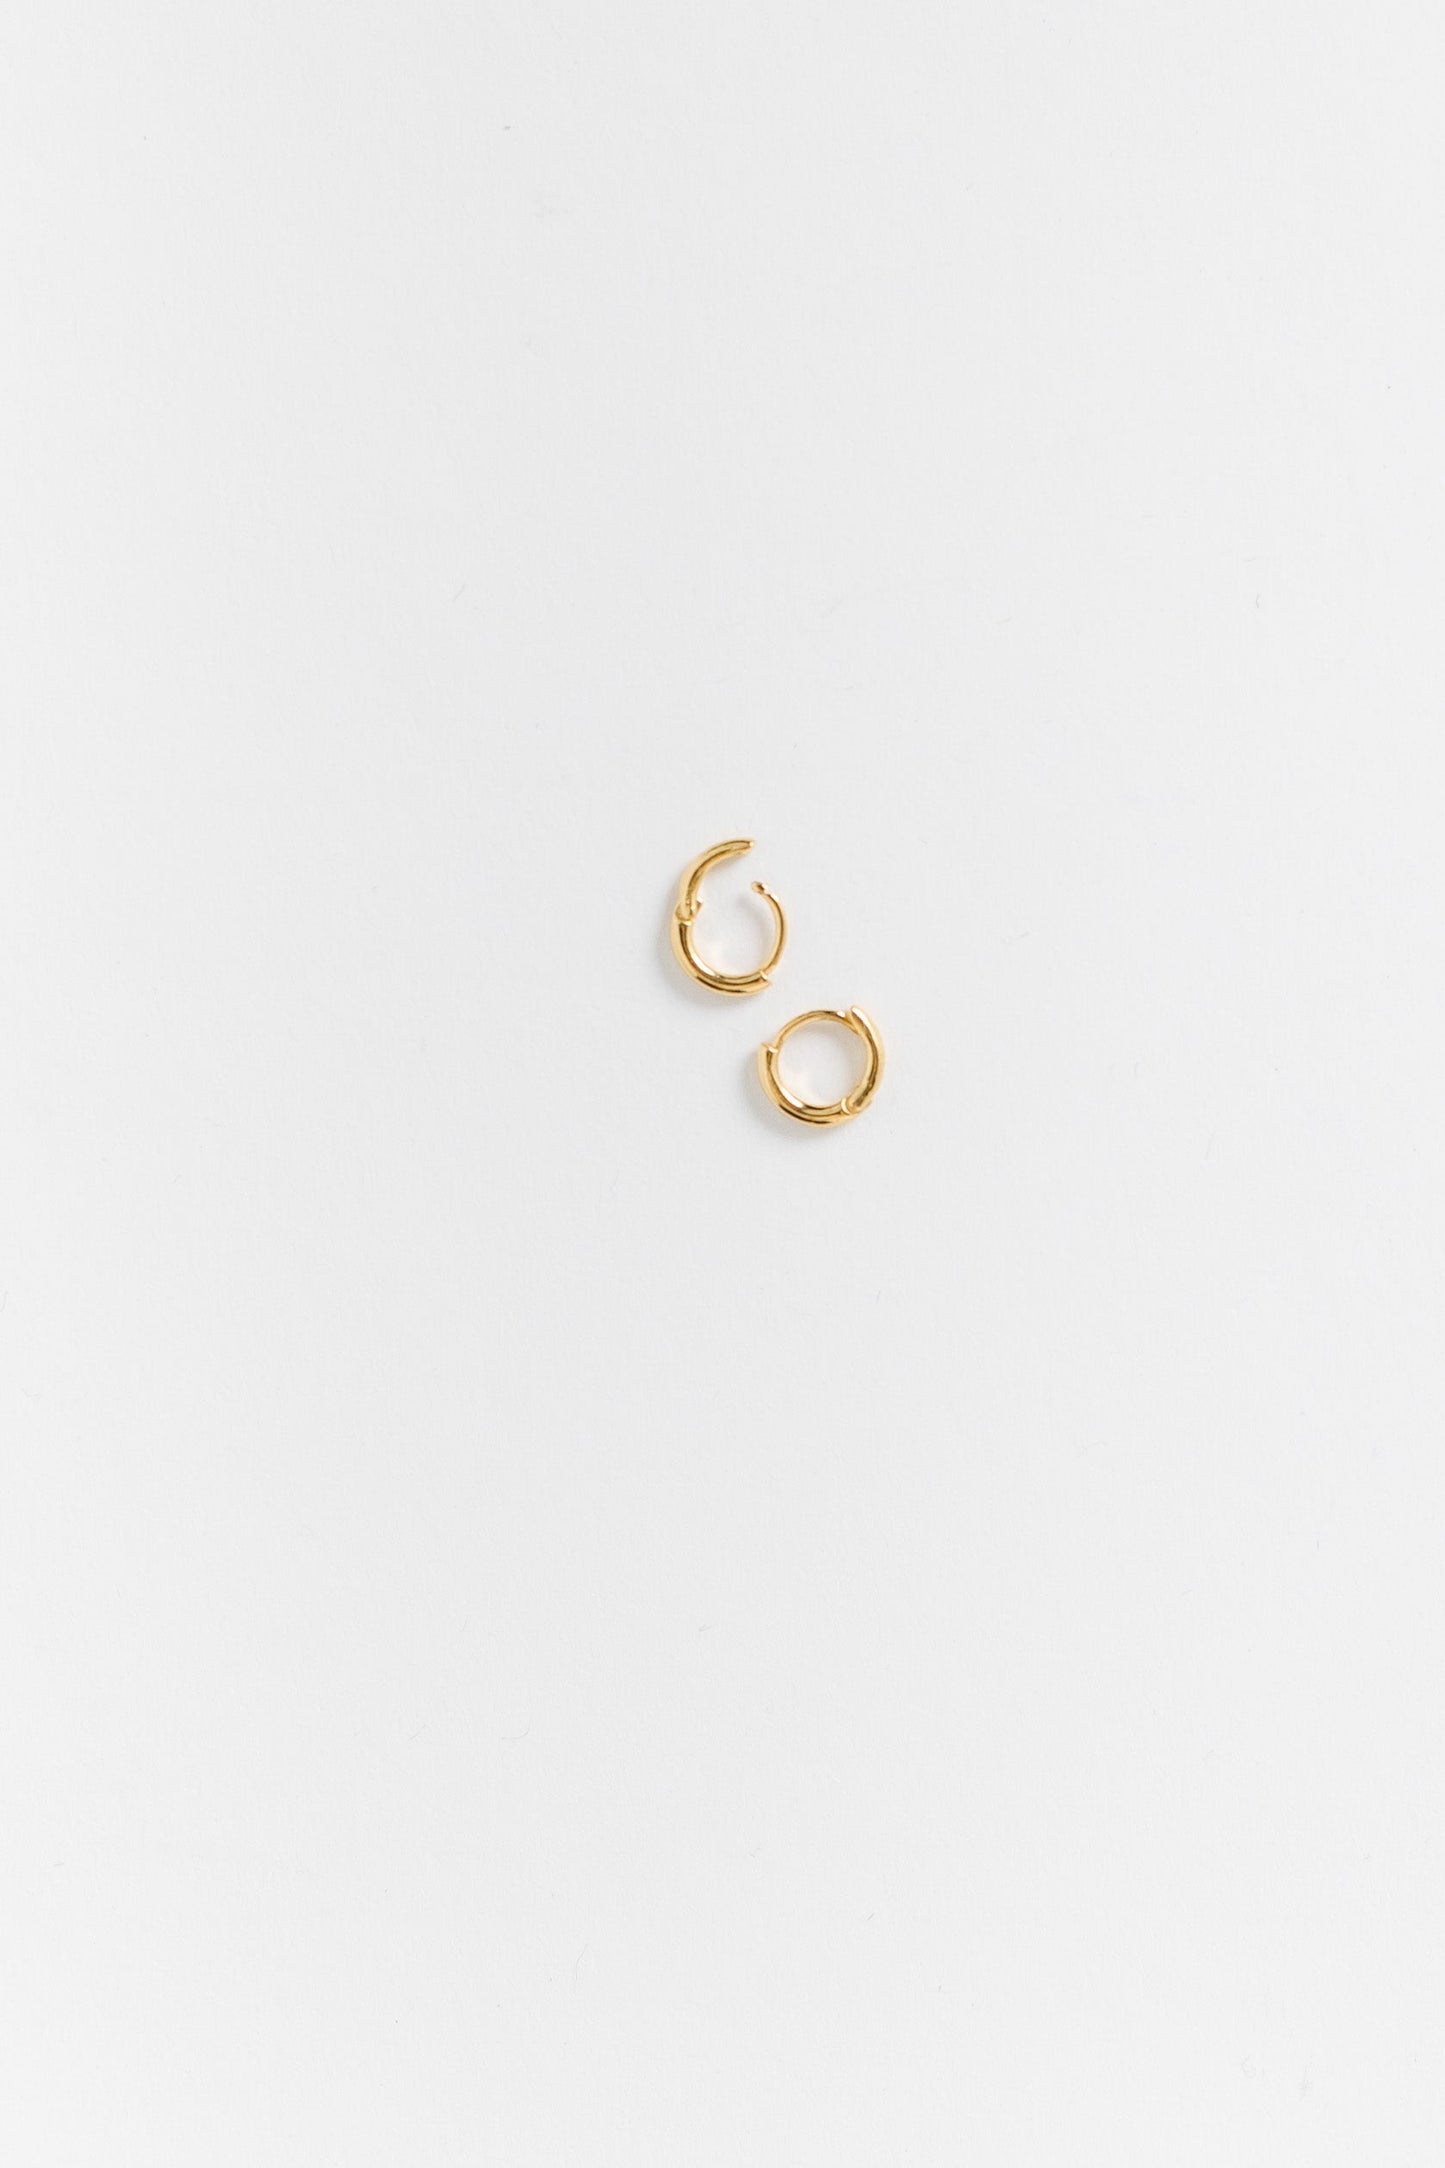 Gold Petite Hoops WOMEN'S EARINGS Cove Gold Plated OS 